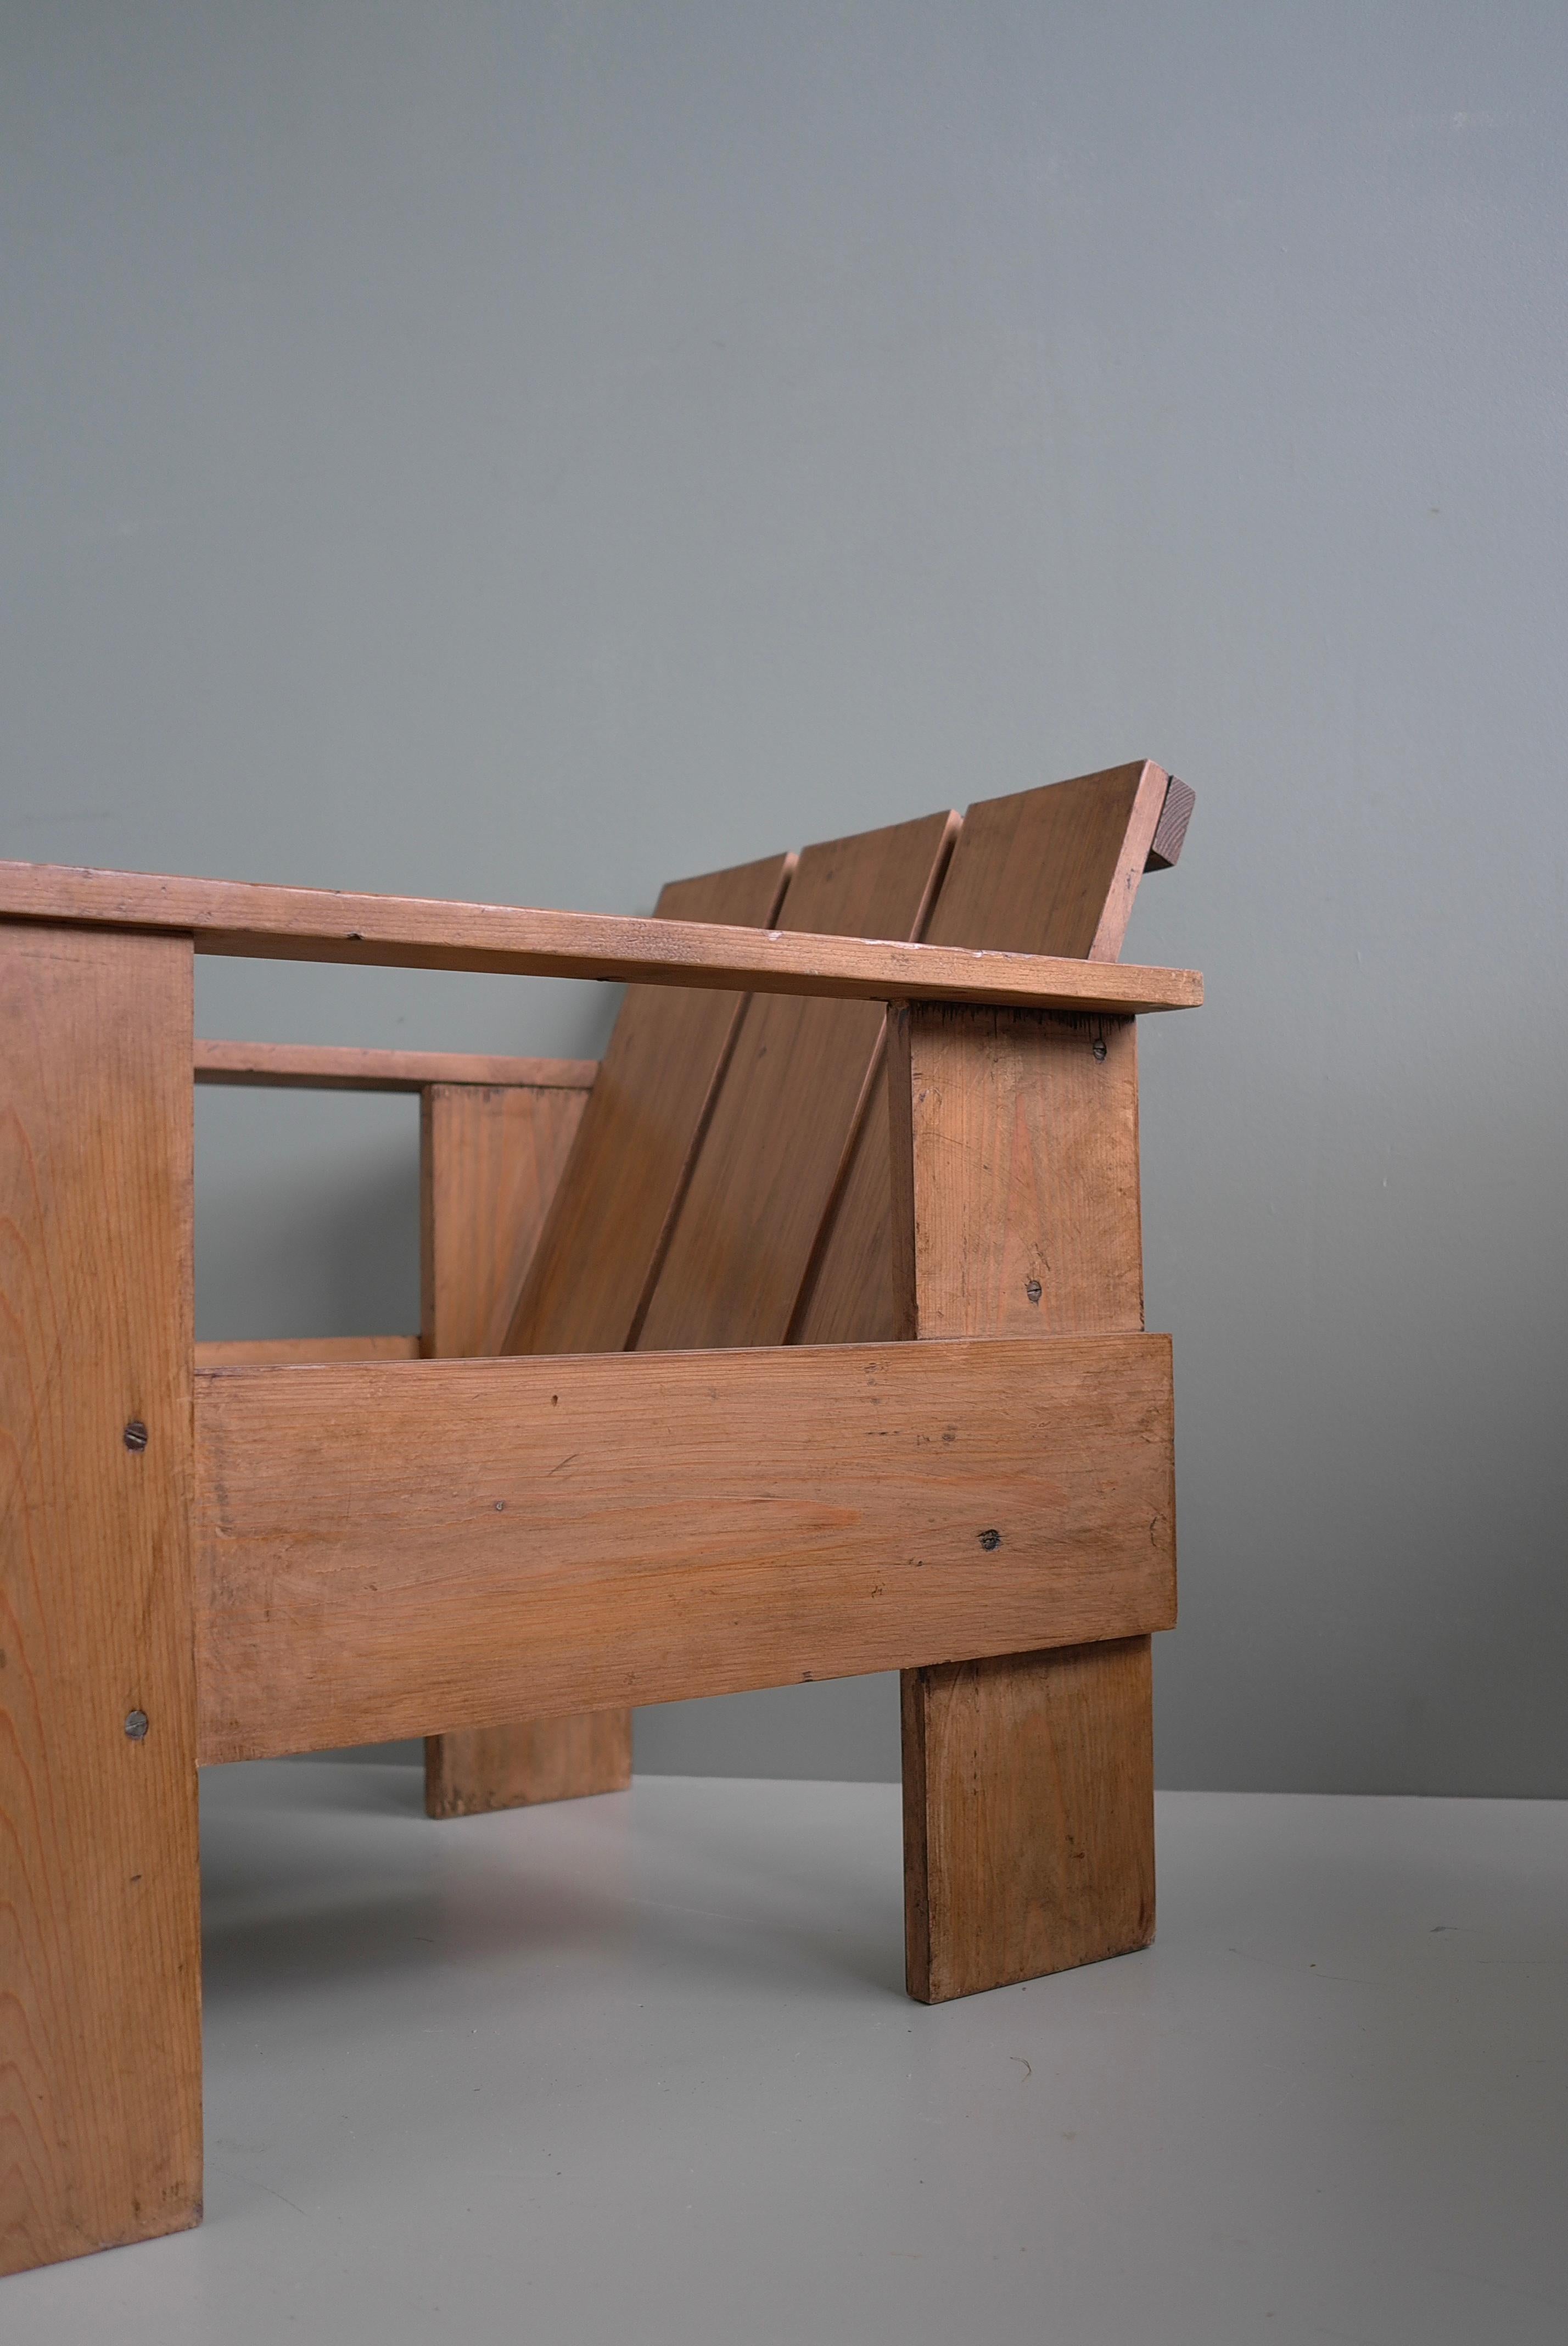 Crate Chair in style of Gerrit Rietveld, The Netherlands 1960's For Sale 6